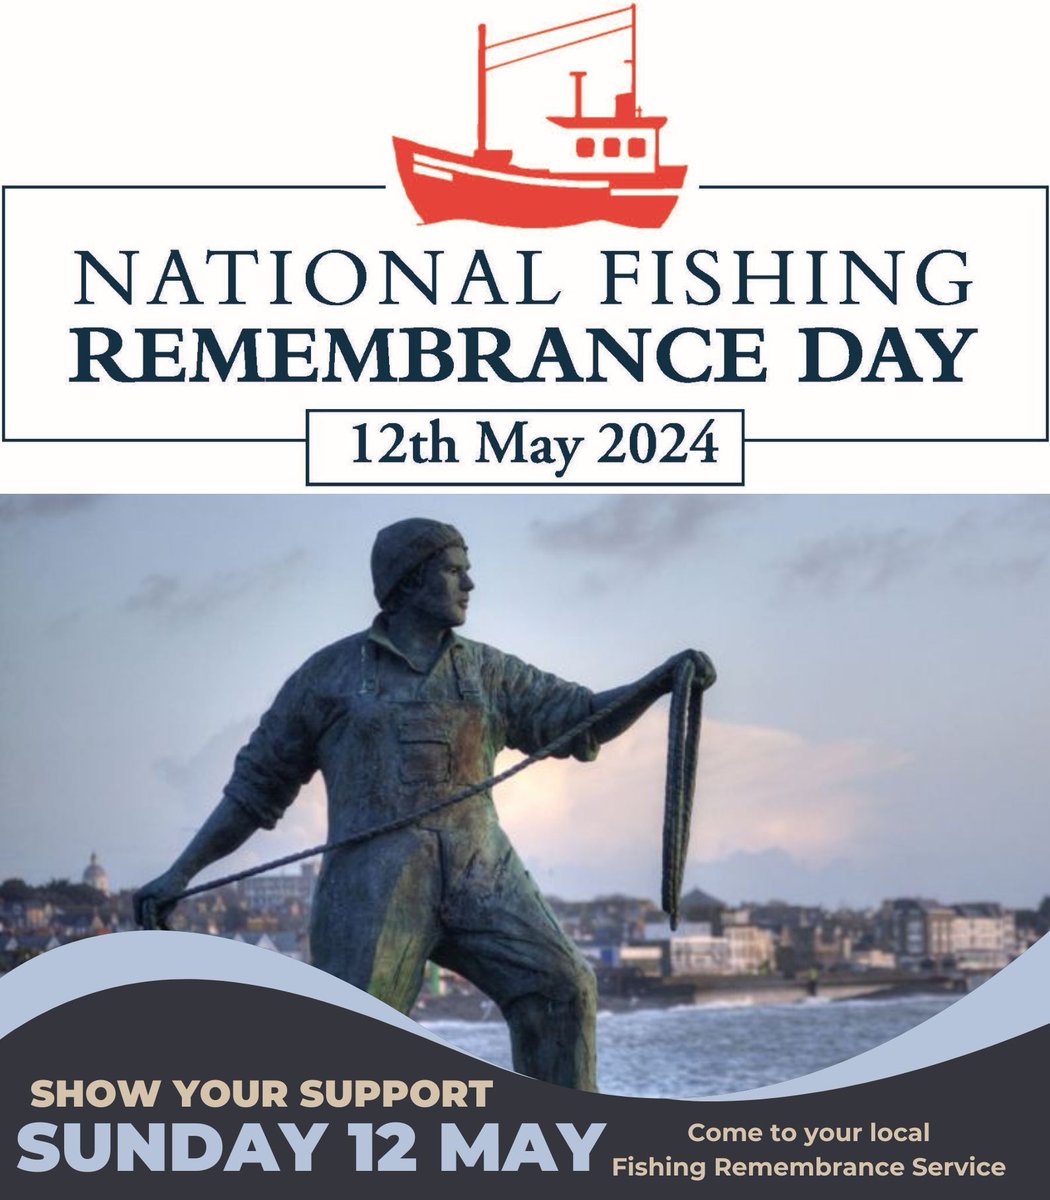 📢 Only one month to go until @Seafarers_KGFS’s National Fishing Remembrance Day! There are many commemoration events happening throughout the country. More info on their website: buff.ly/3TARREb